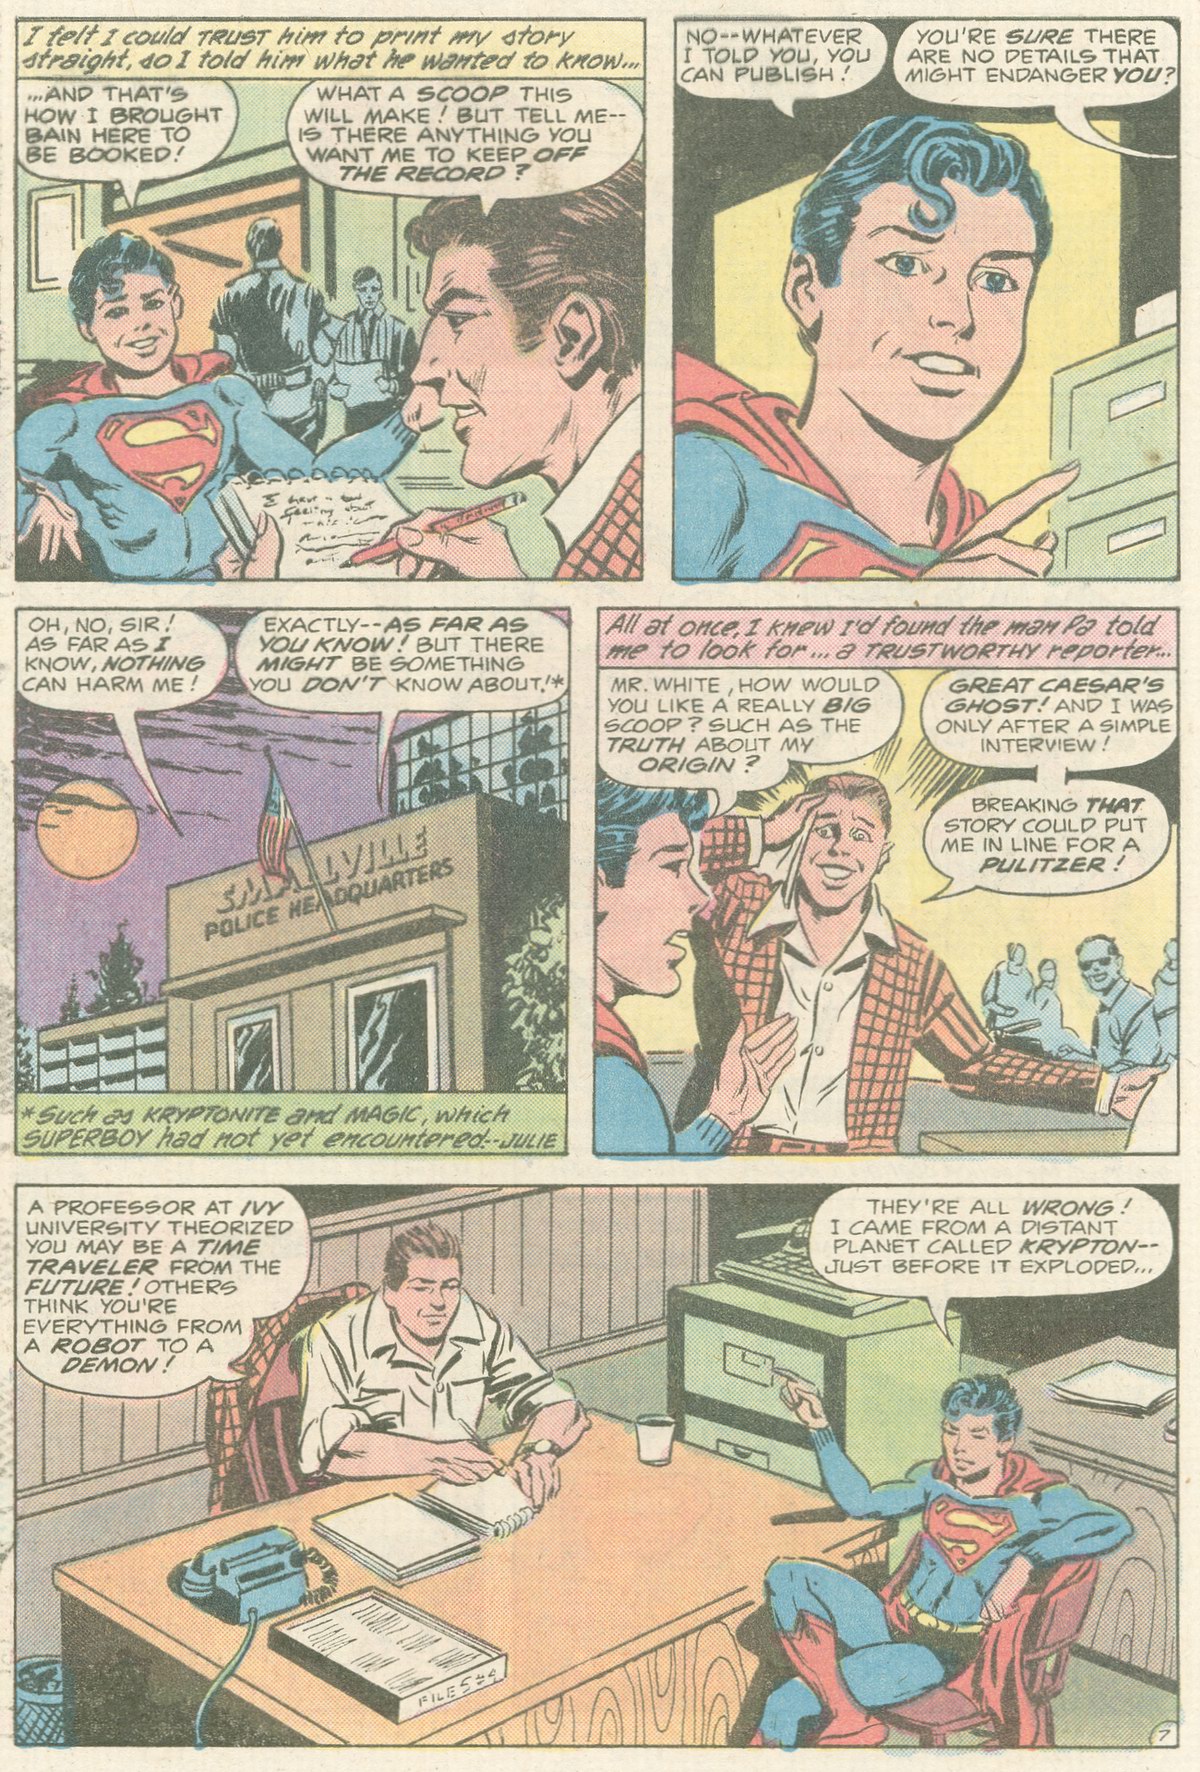 The New Adventures of Superboy 12 Page 24